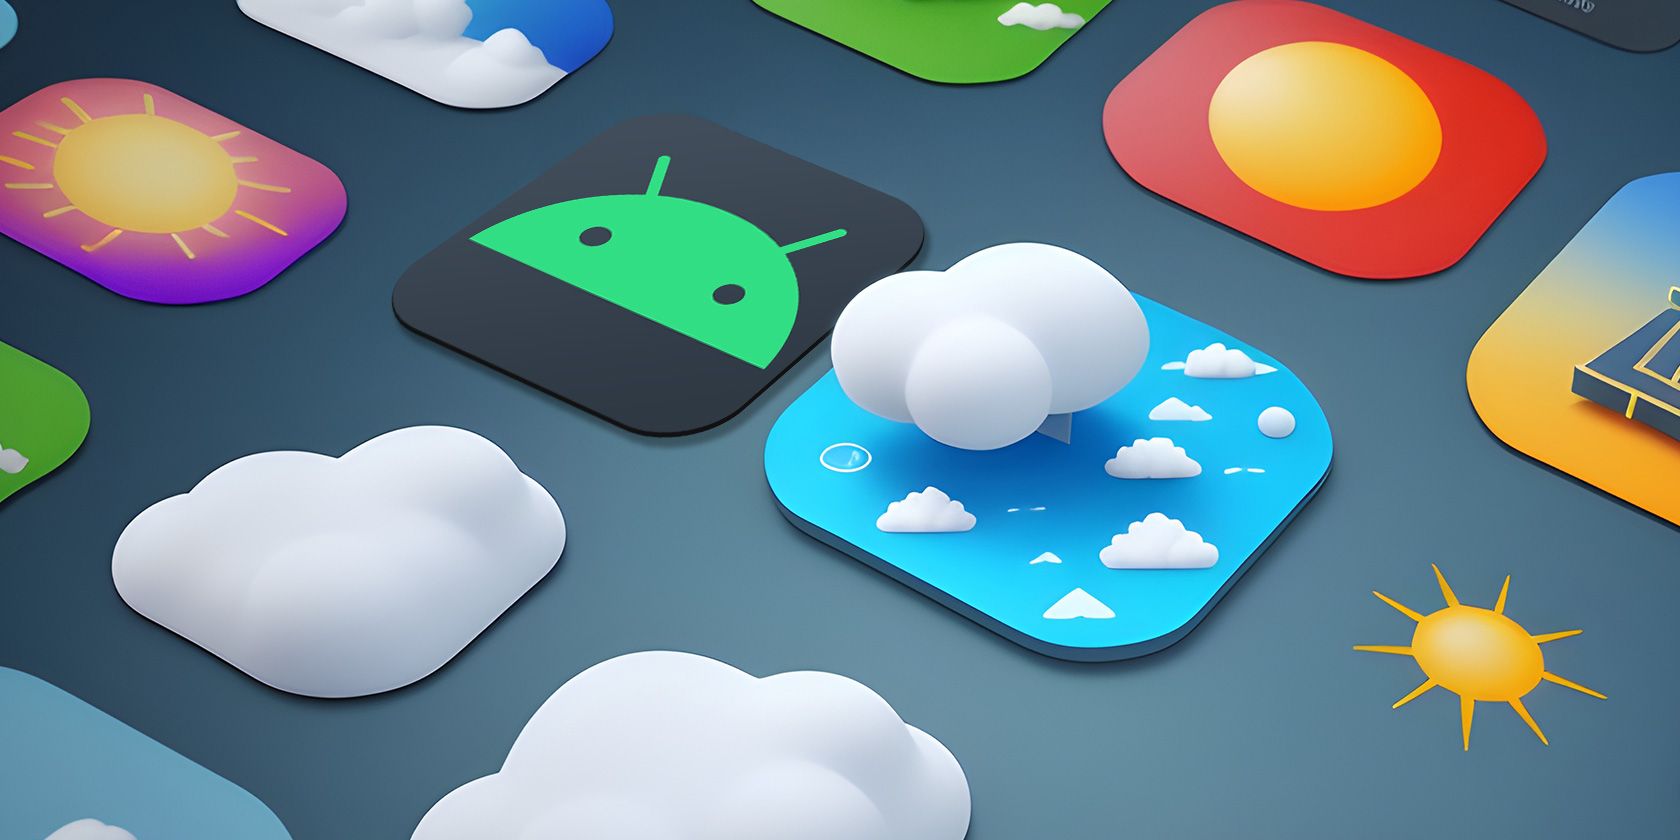 The 10 Best Ad-Free Weather Apps and Widgets for Android